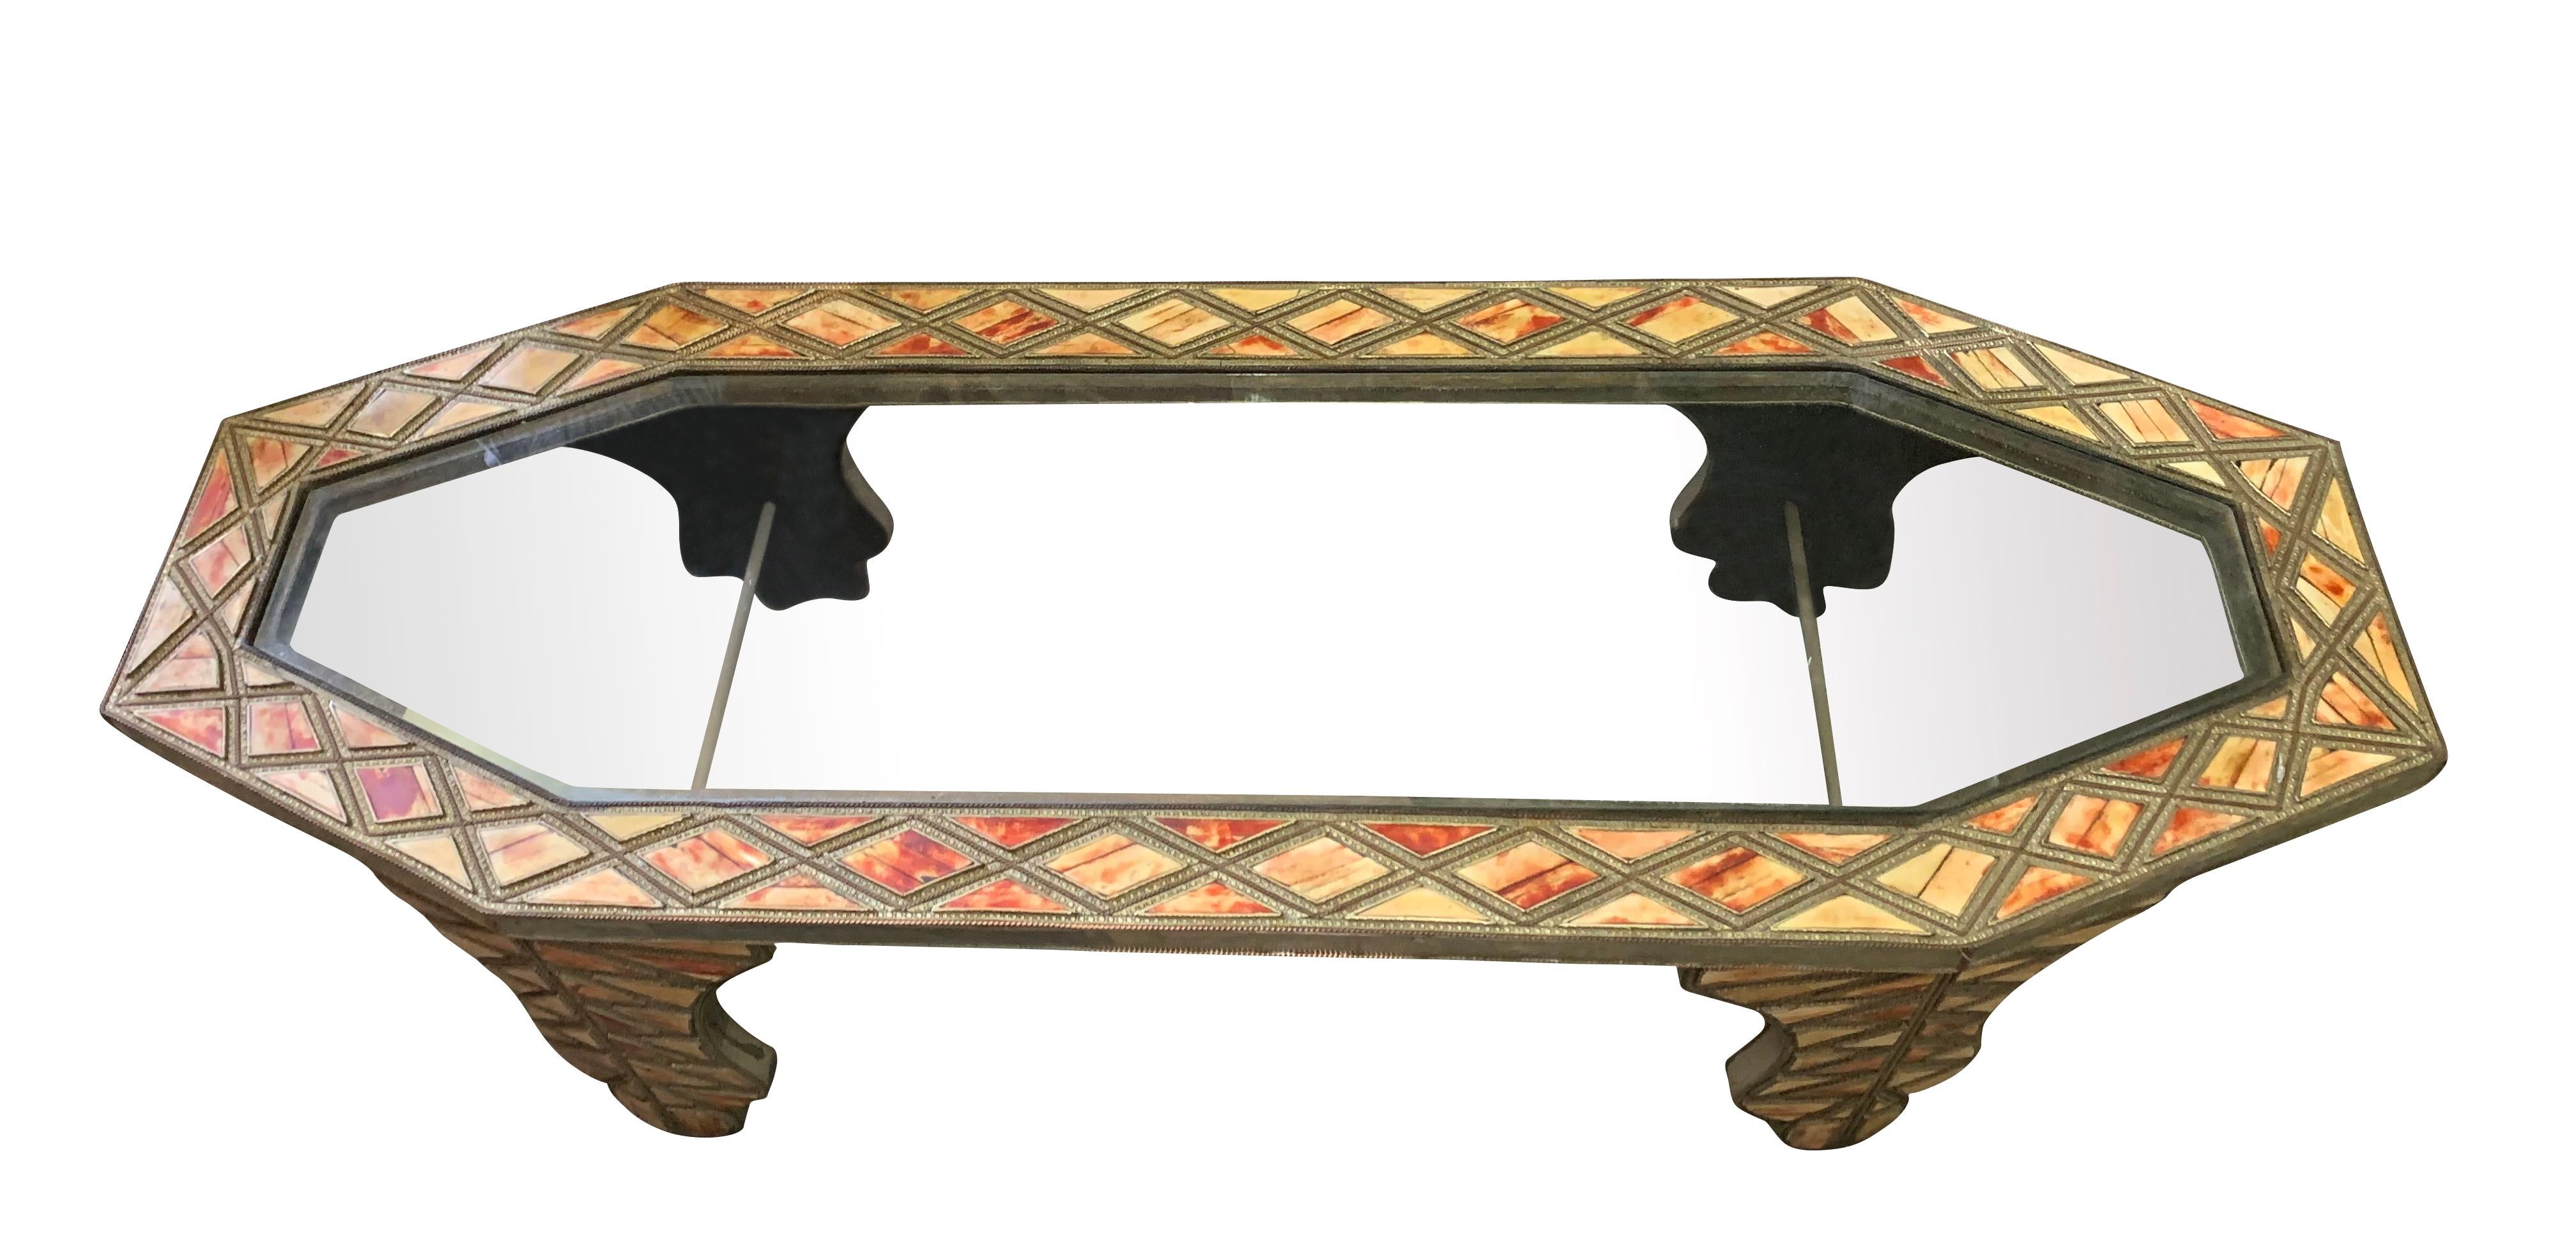 Moroccan Elongated Octagonal Coffee Table, Morocco, Midcentury For Sale